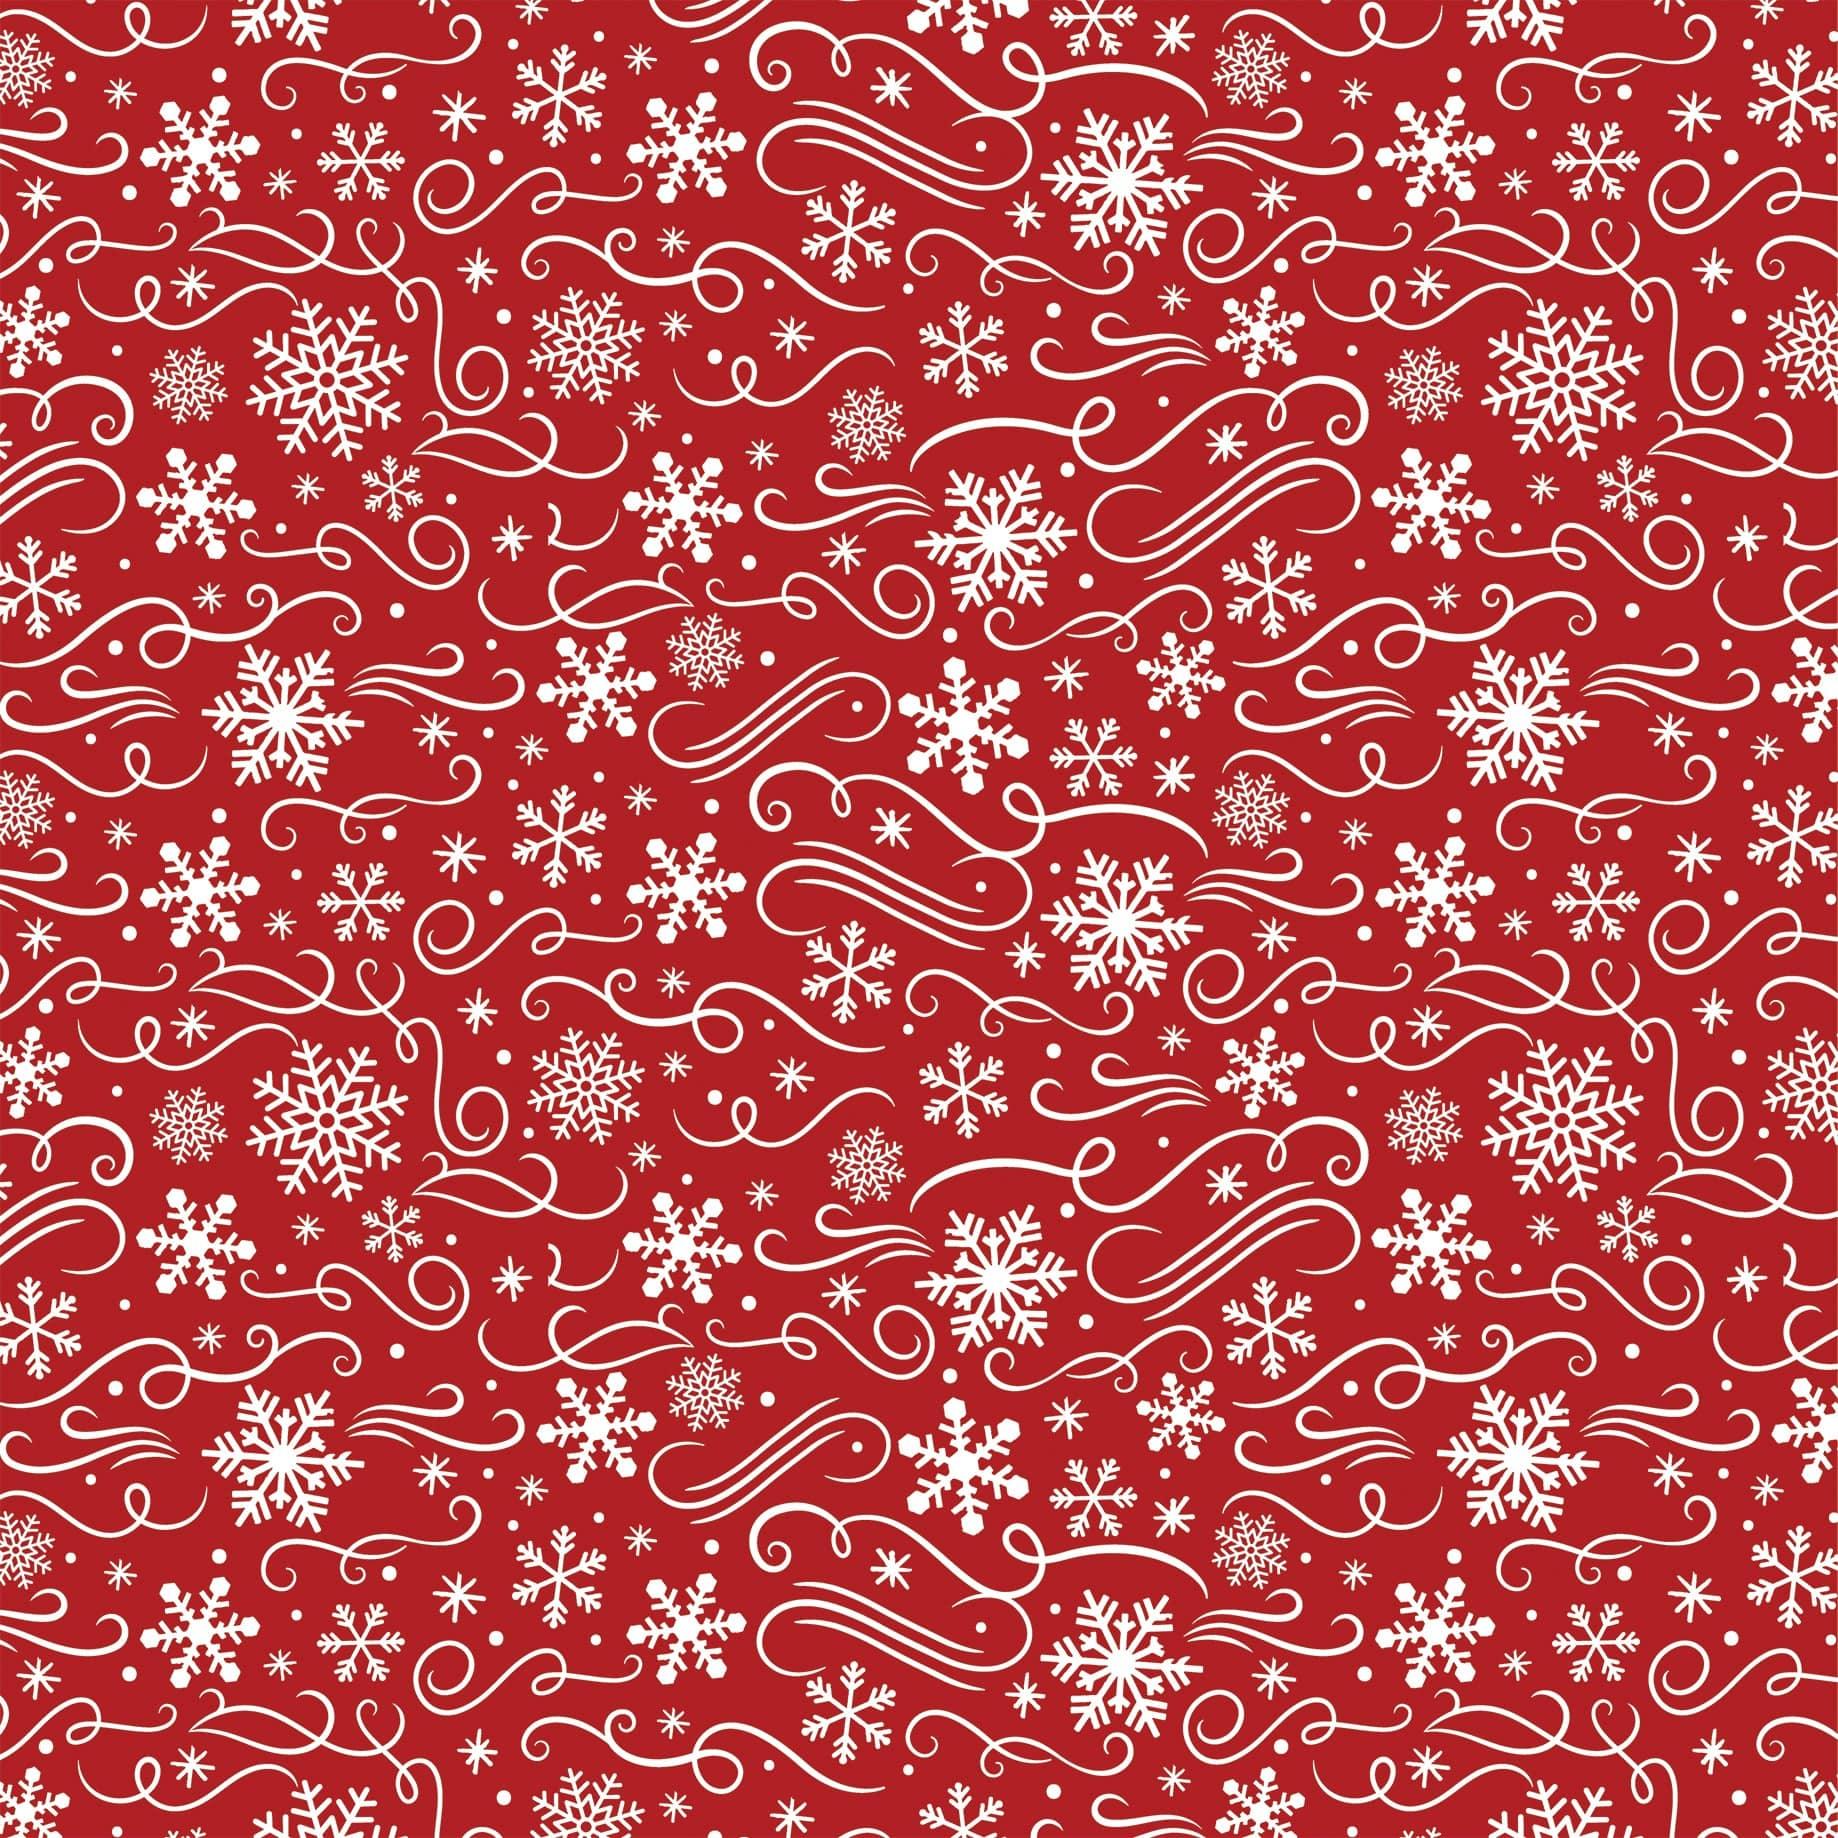 The Magic of Christmas Collection Spirit Of Snow 12 x 12 Double-Sided Scrapbook Paper by Echo Park Paper - Scrapbook Supply Companies